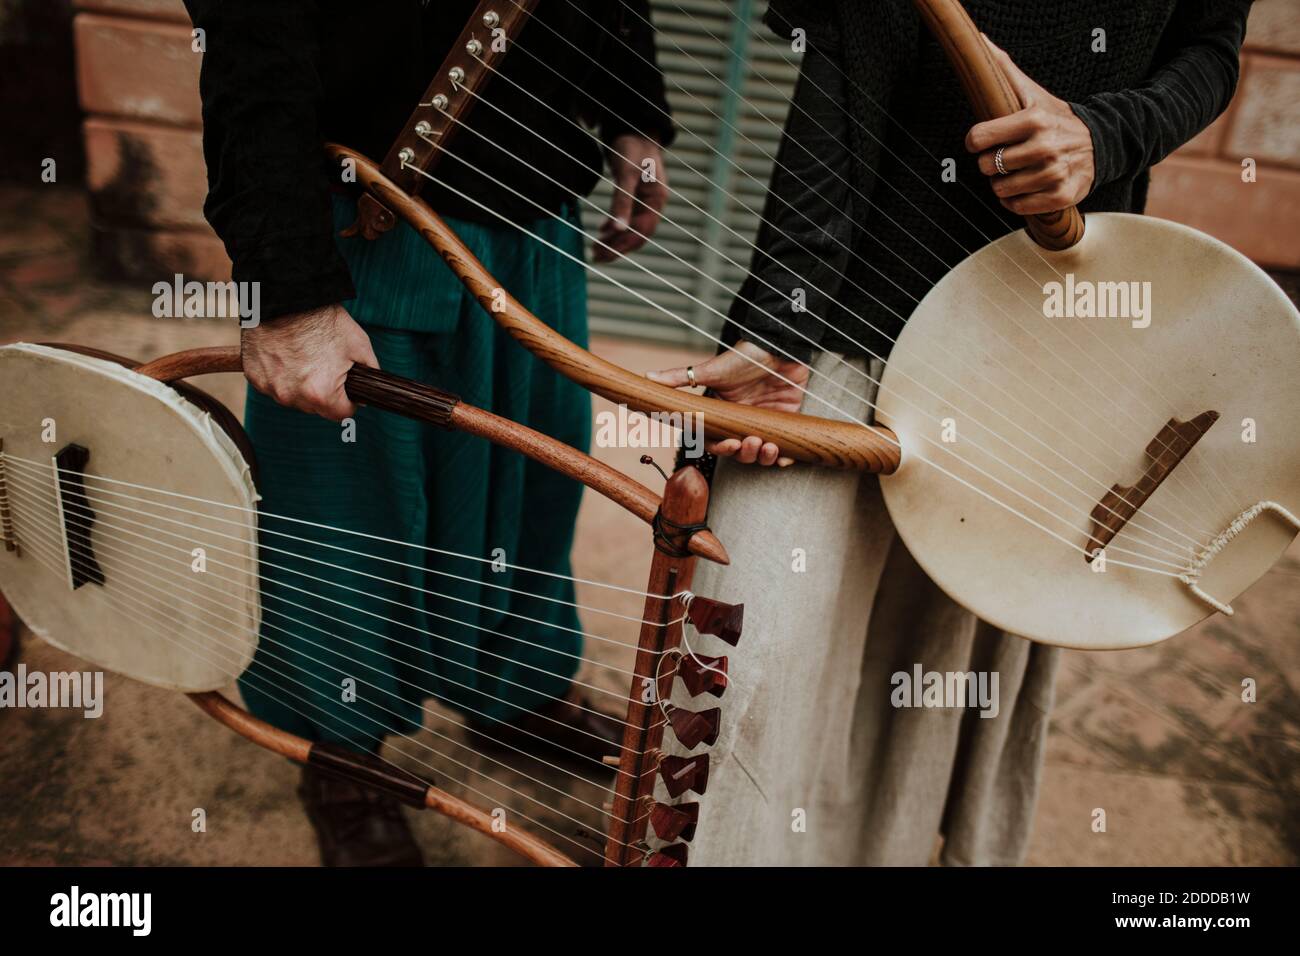 Male and female holding lyra musical instrument outdoors Stock Photo